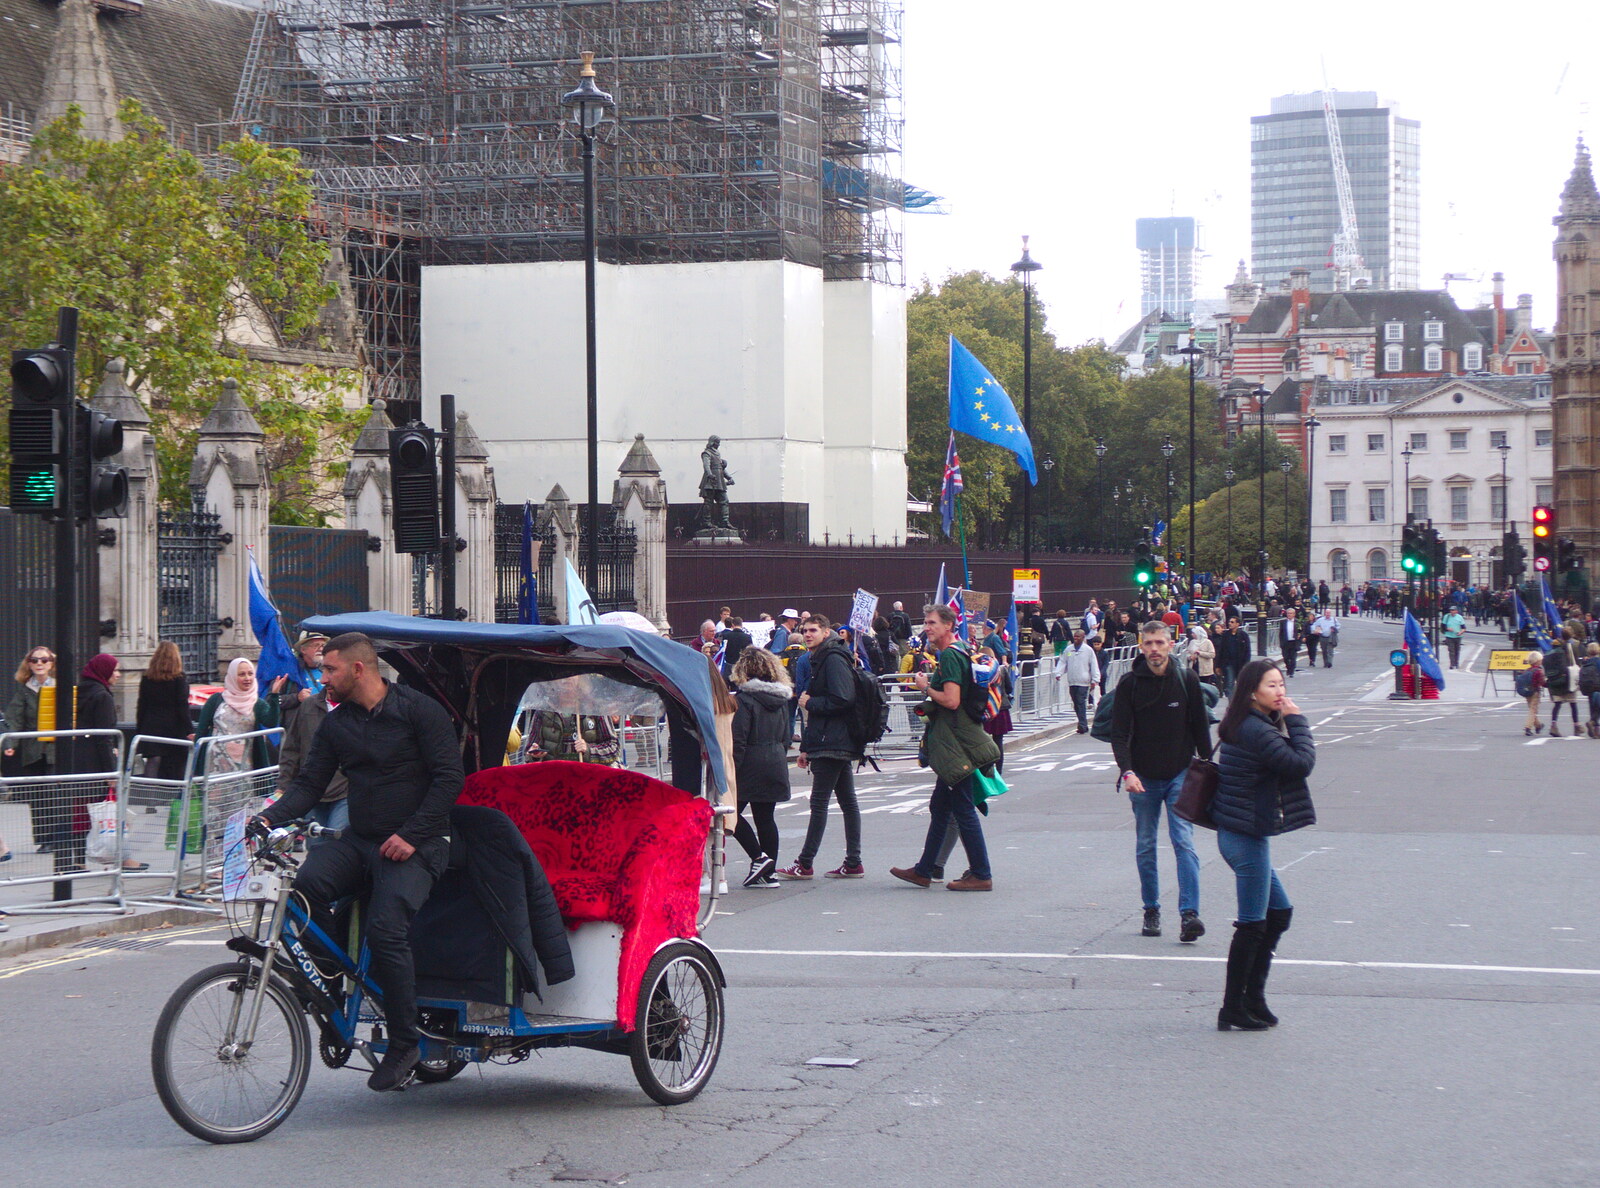 A bicycle rickshaw in Parliament Square from The Extinction Rebellion Protest, Westminster, London - 9th October 2019